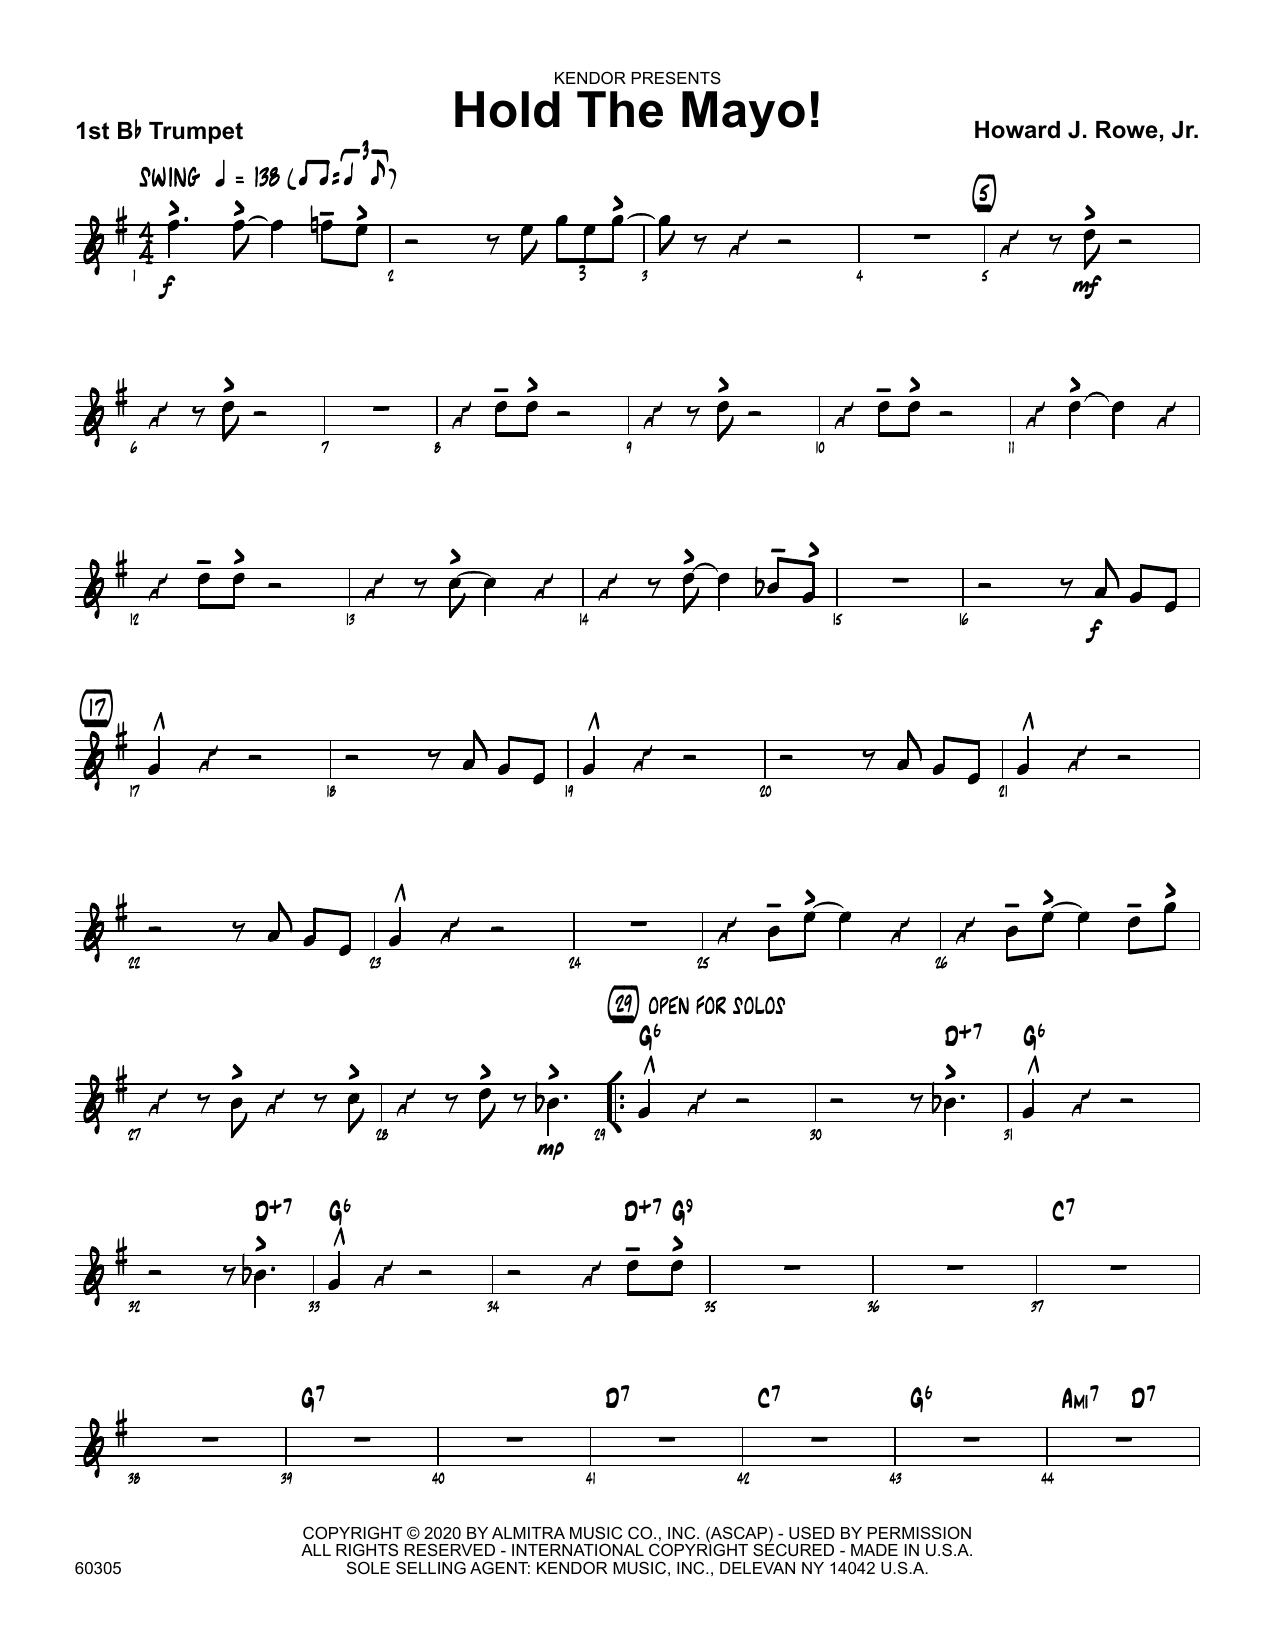 Download Howard Rowe Hold The Mayo! - 1st Bb Trumpet Sheet Music